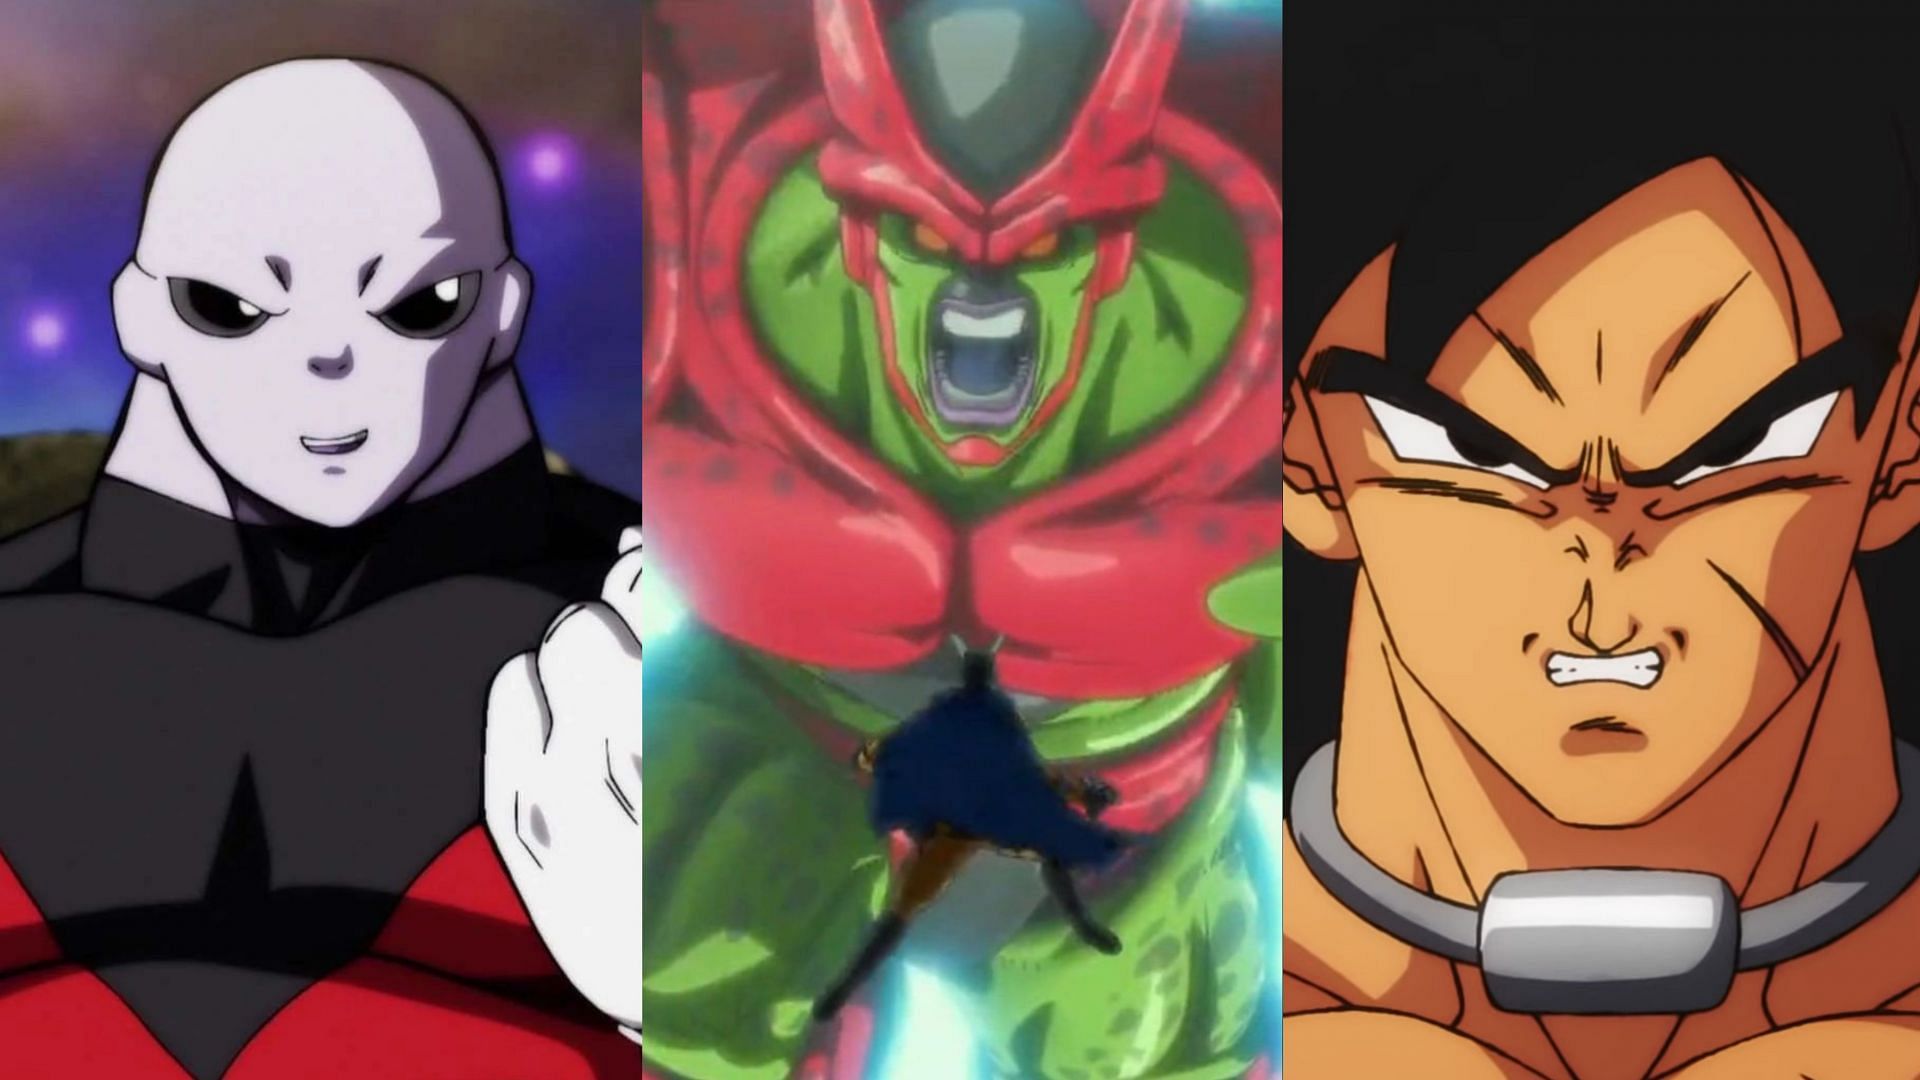 The latest movie in the Dragon Ball franchise, Super Hero, has given fans m...